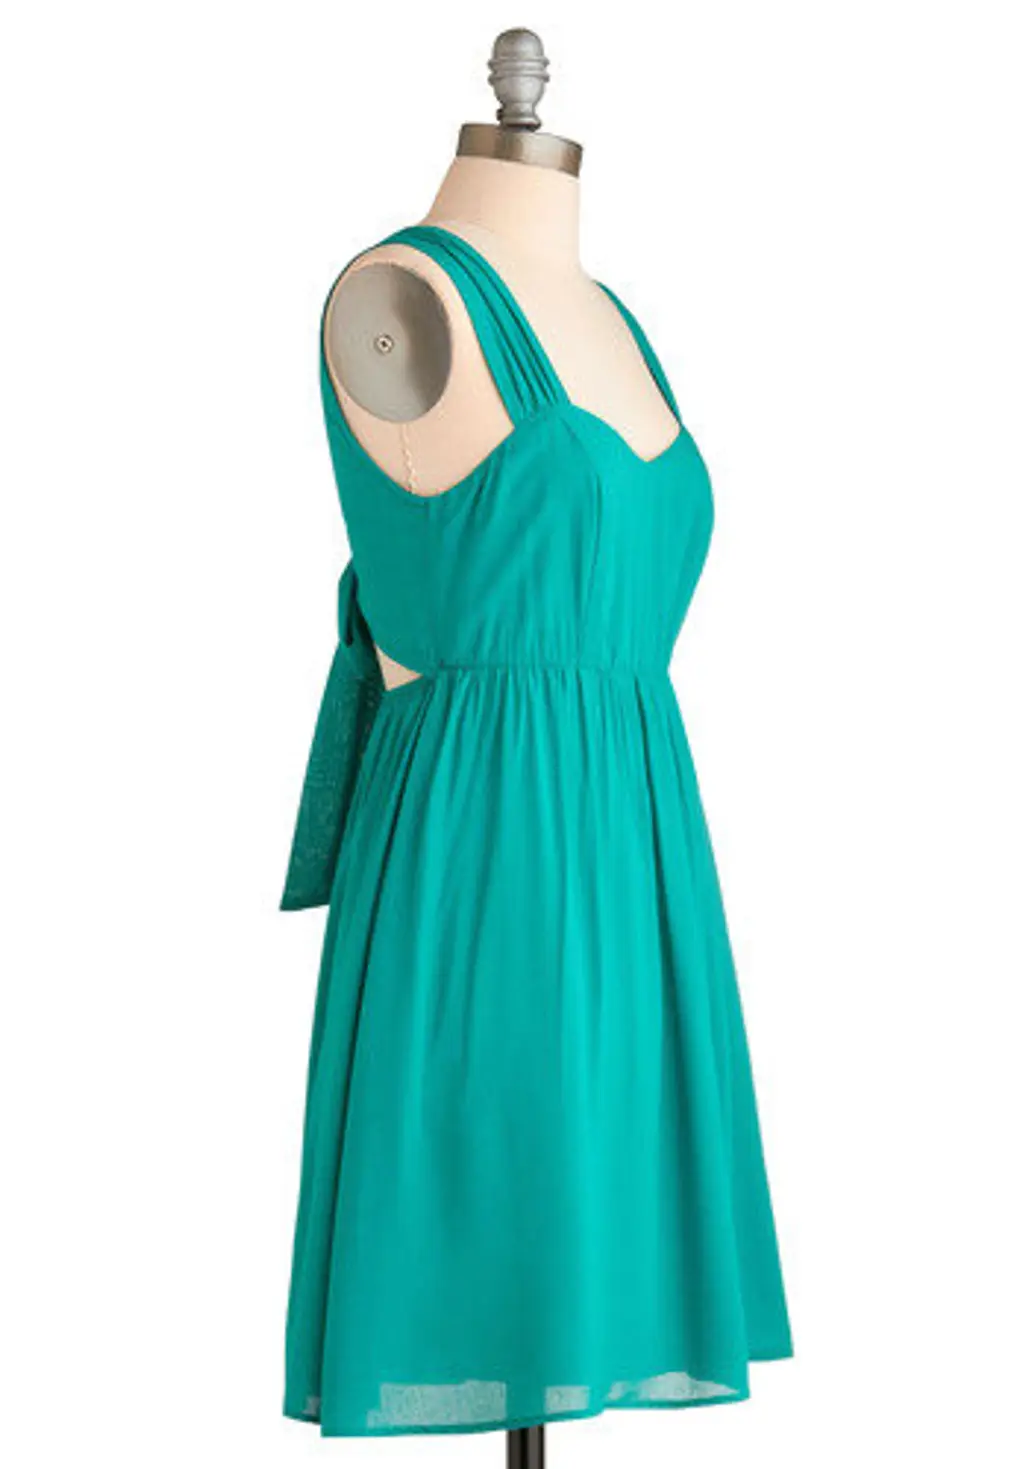 Teal It to My Heart Dress